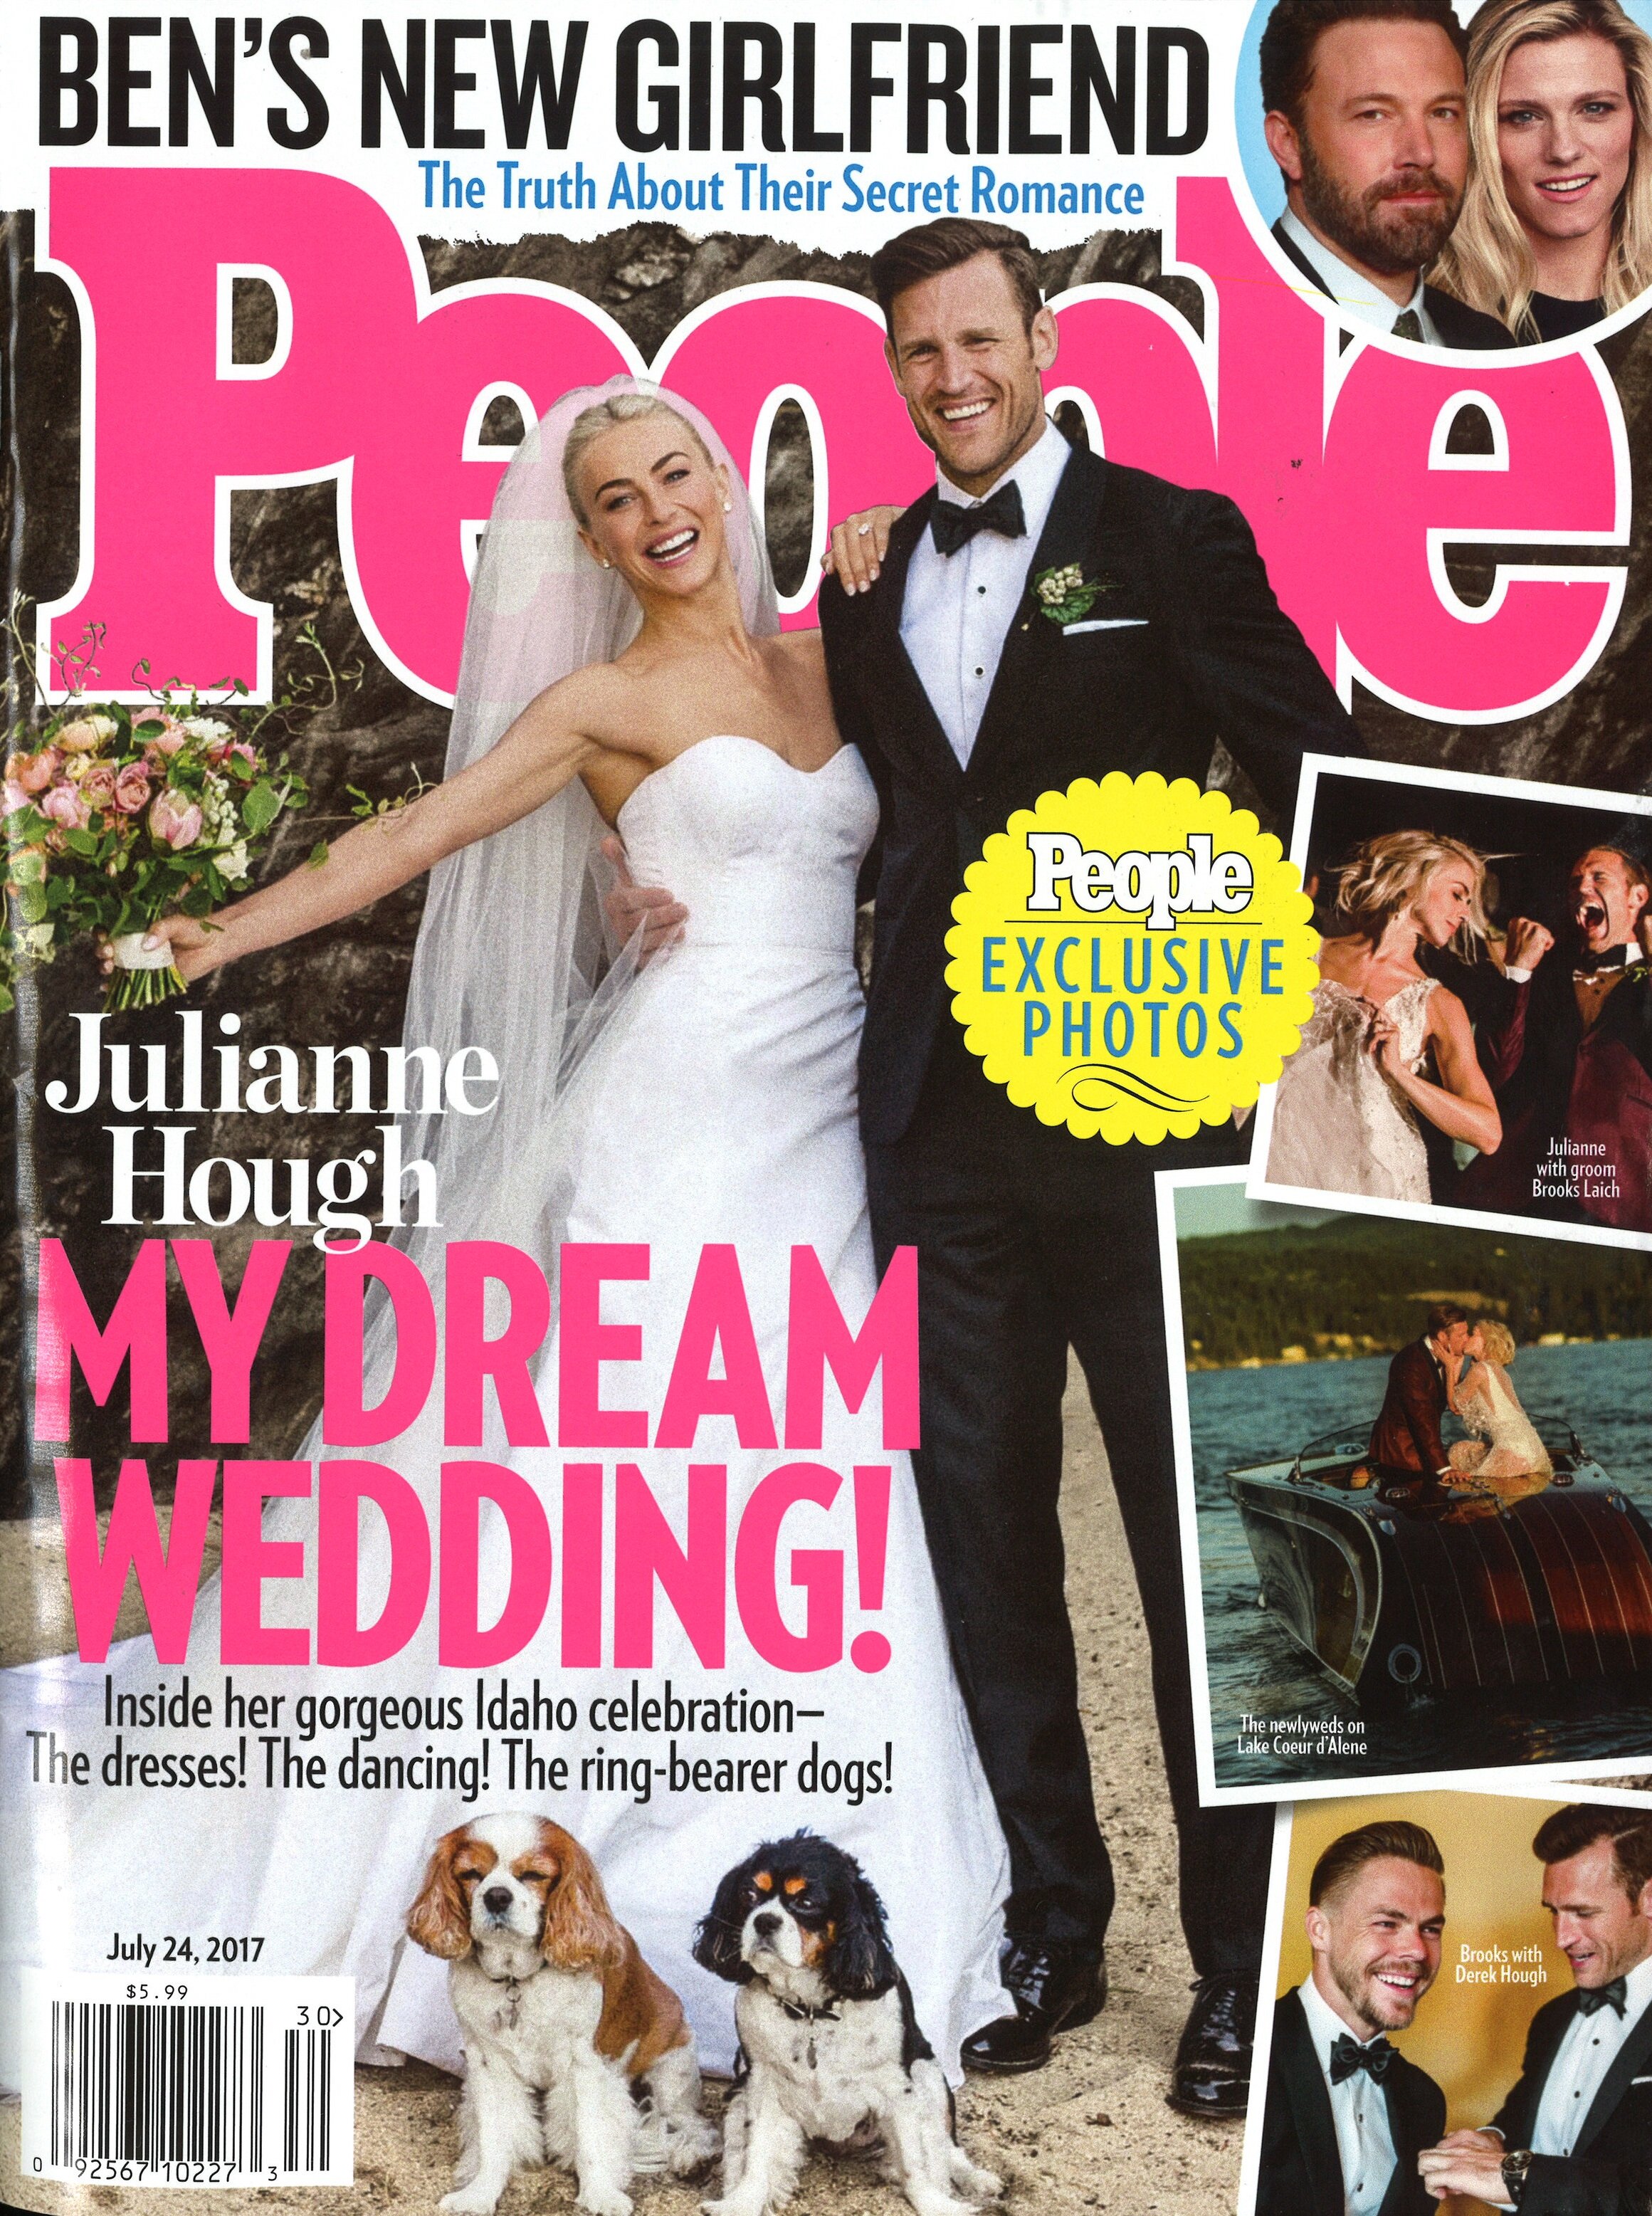   Celebrity Julianne Hough Chooses Marchesa Notte For Her Bridesmaids’ Dresses, Covered In People Magazine  